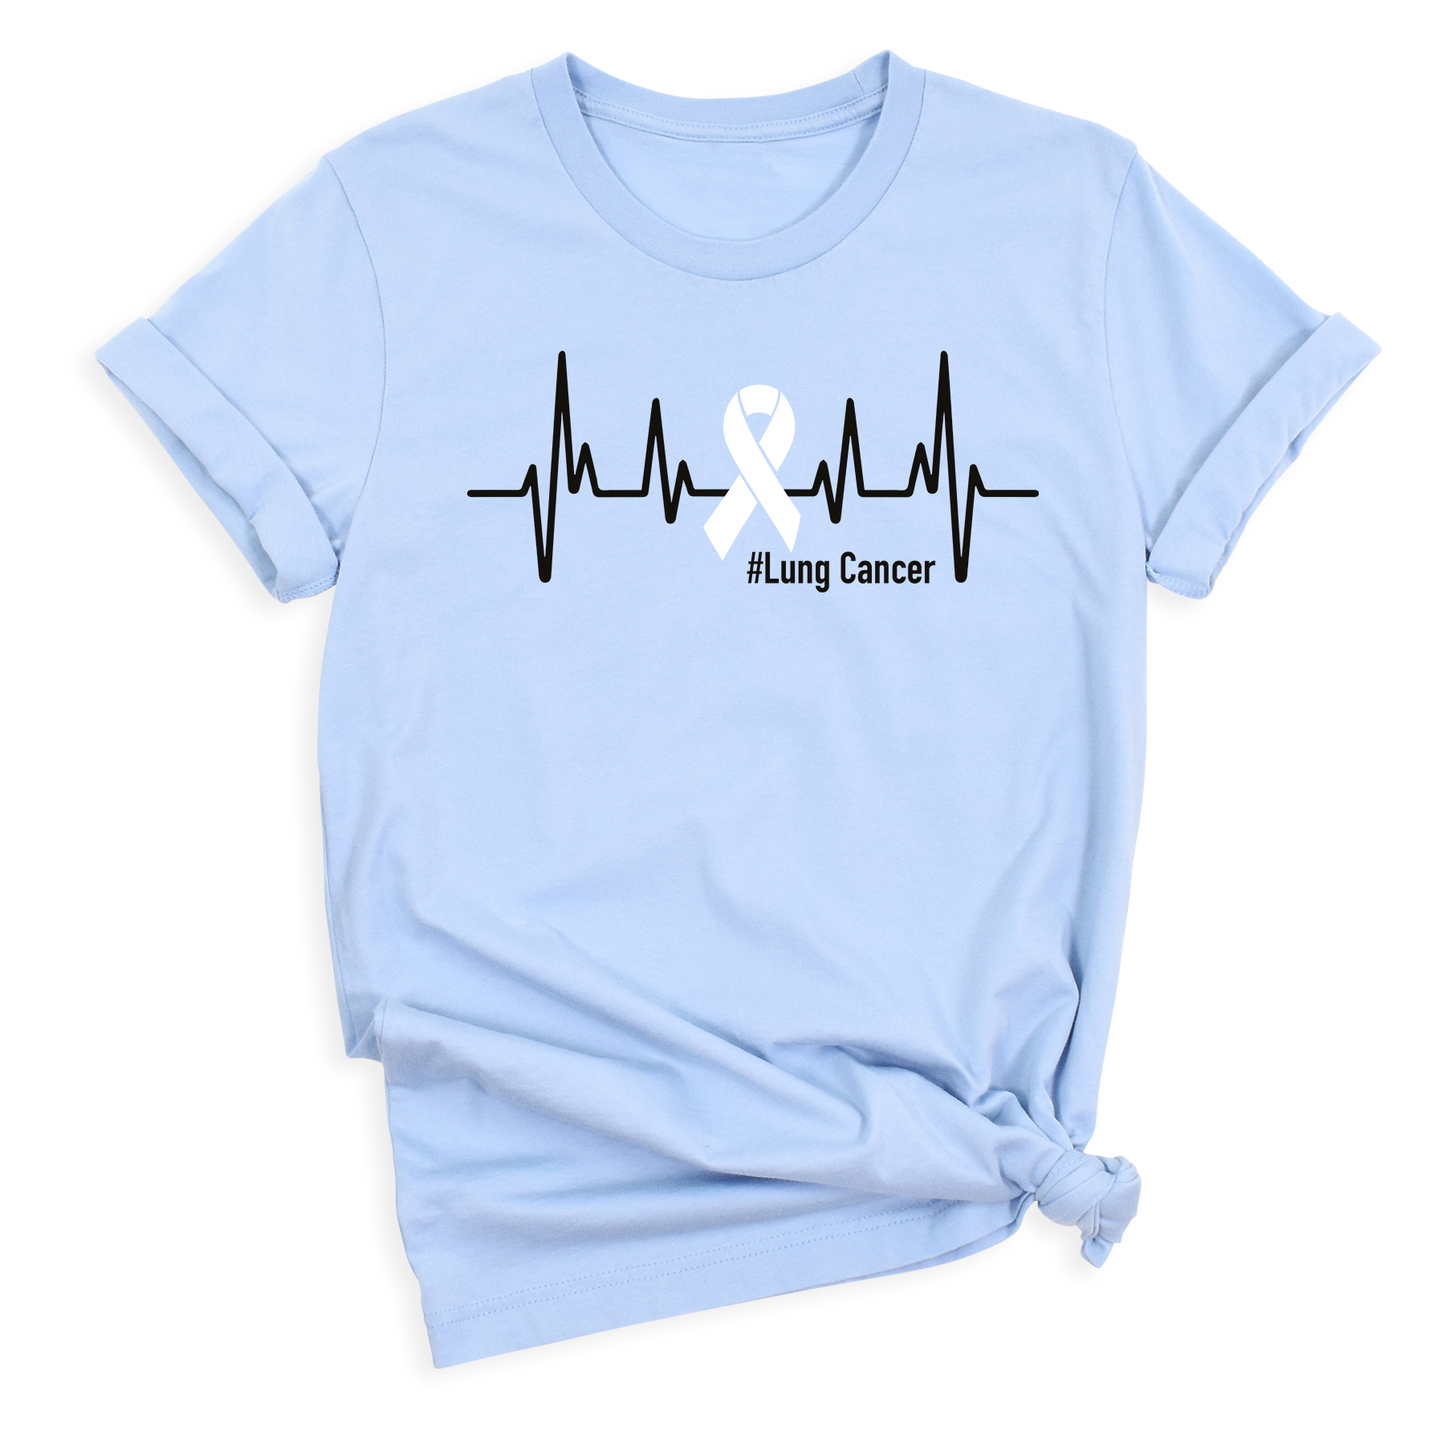 Lung Cancer Support Shirts